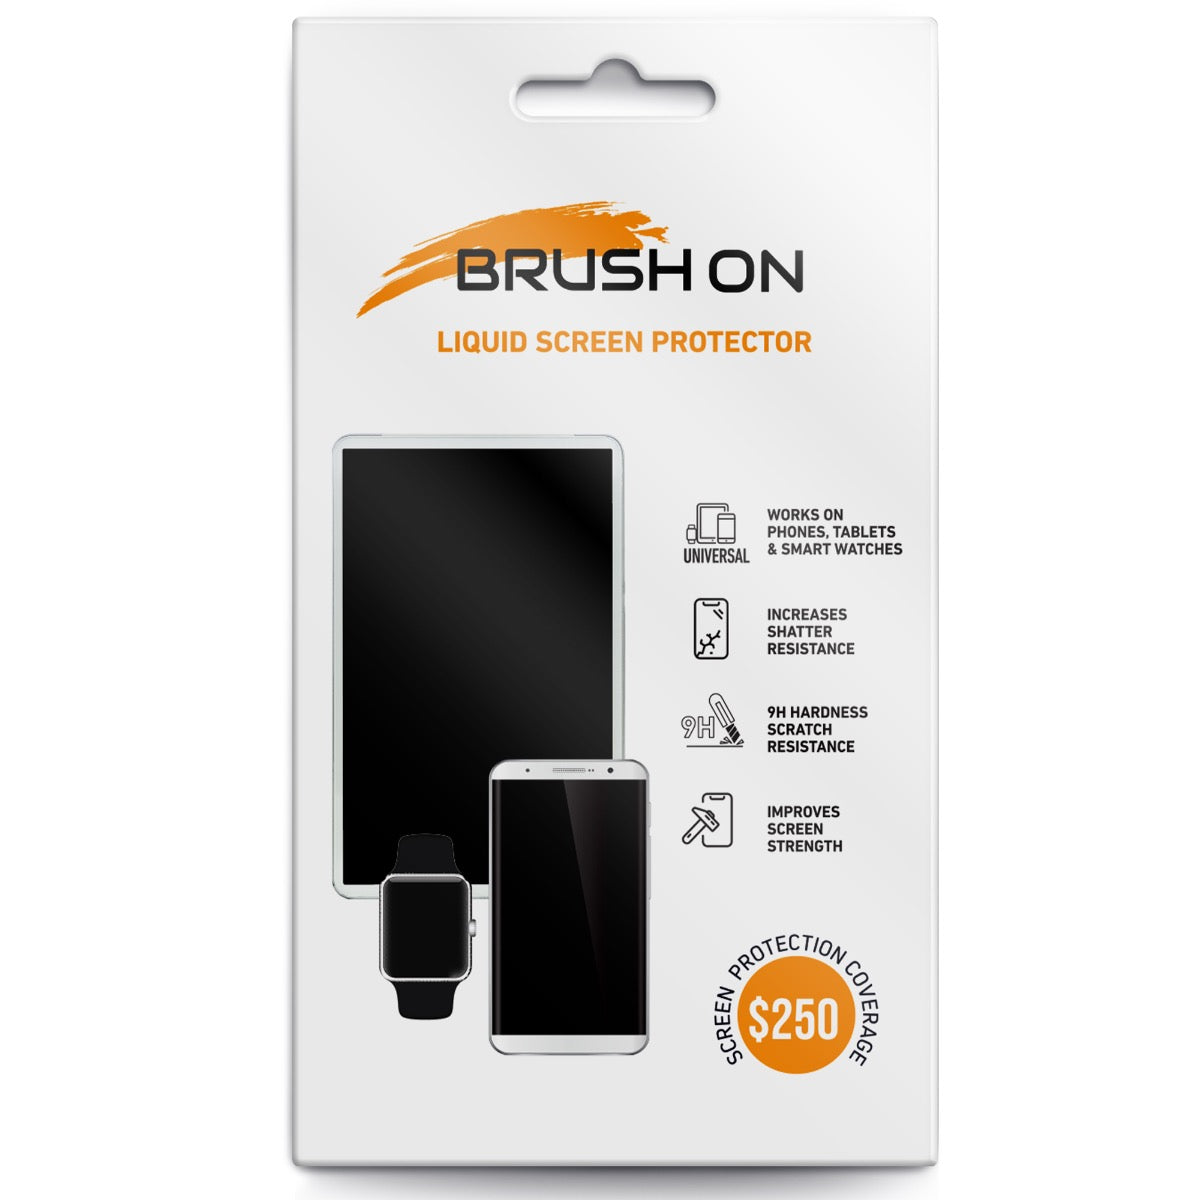 BRUSH ON Liquid Glass Screen Protector with $250 Coverage for All Devices